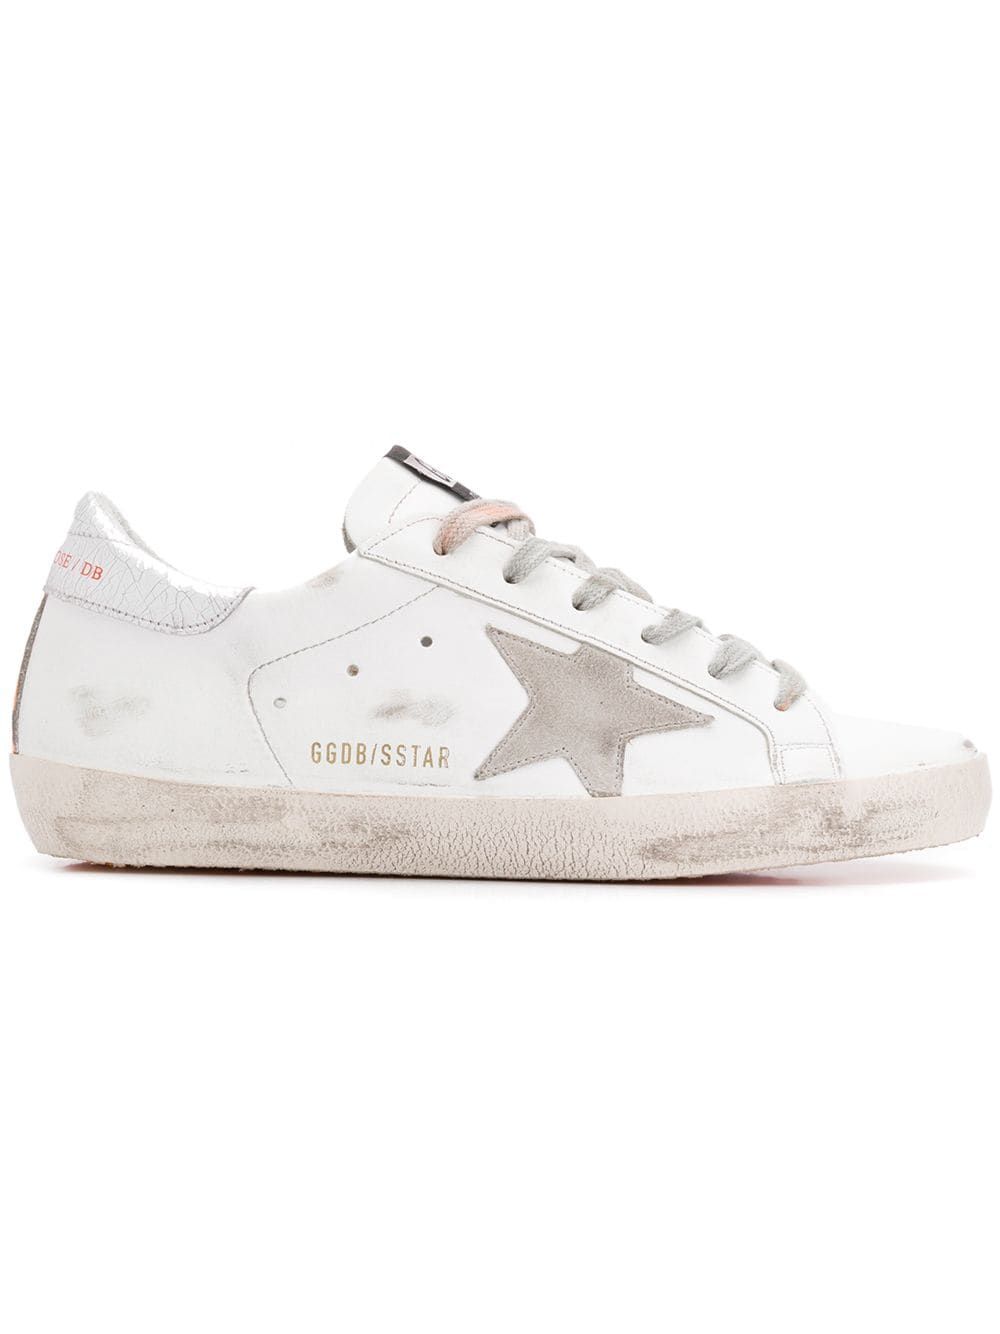 Golden Goose Deluxe Brand Superstar sneakers - White | FarFetch US